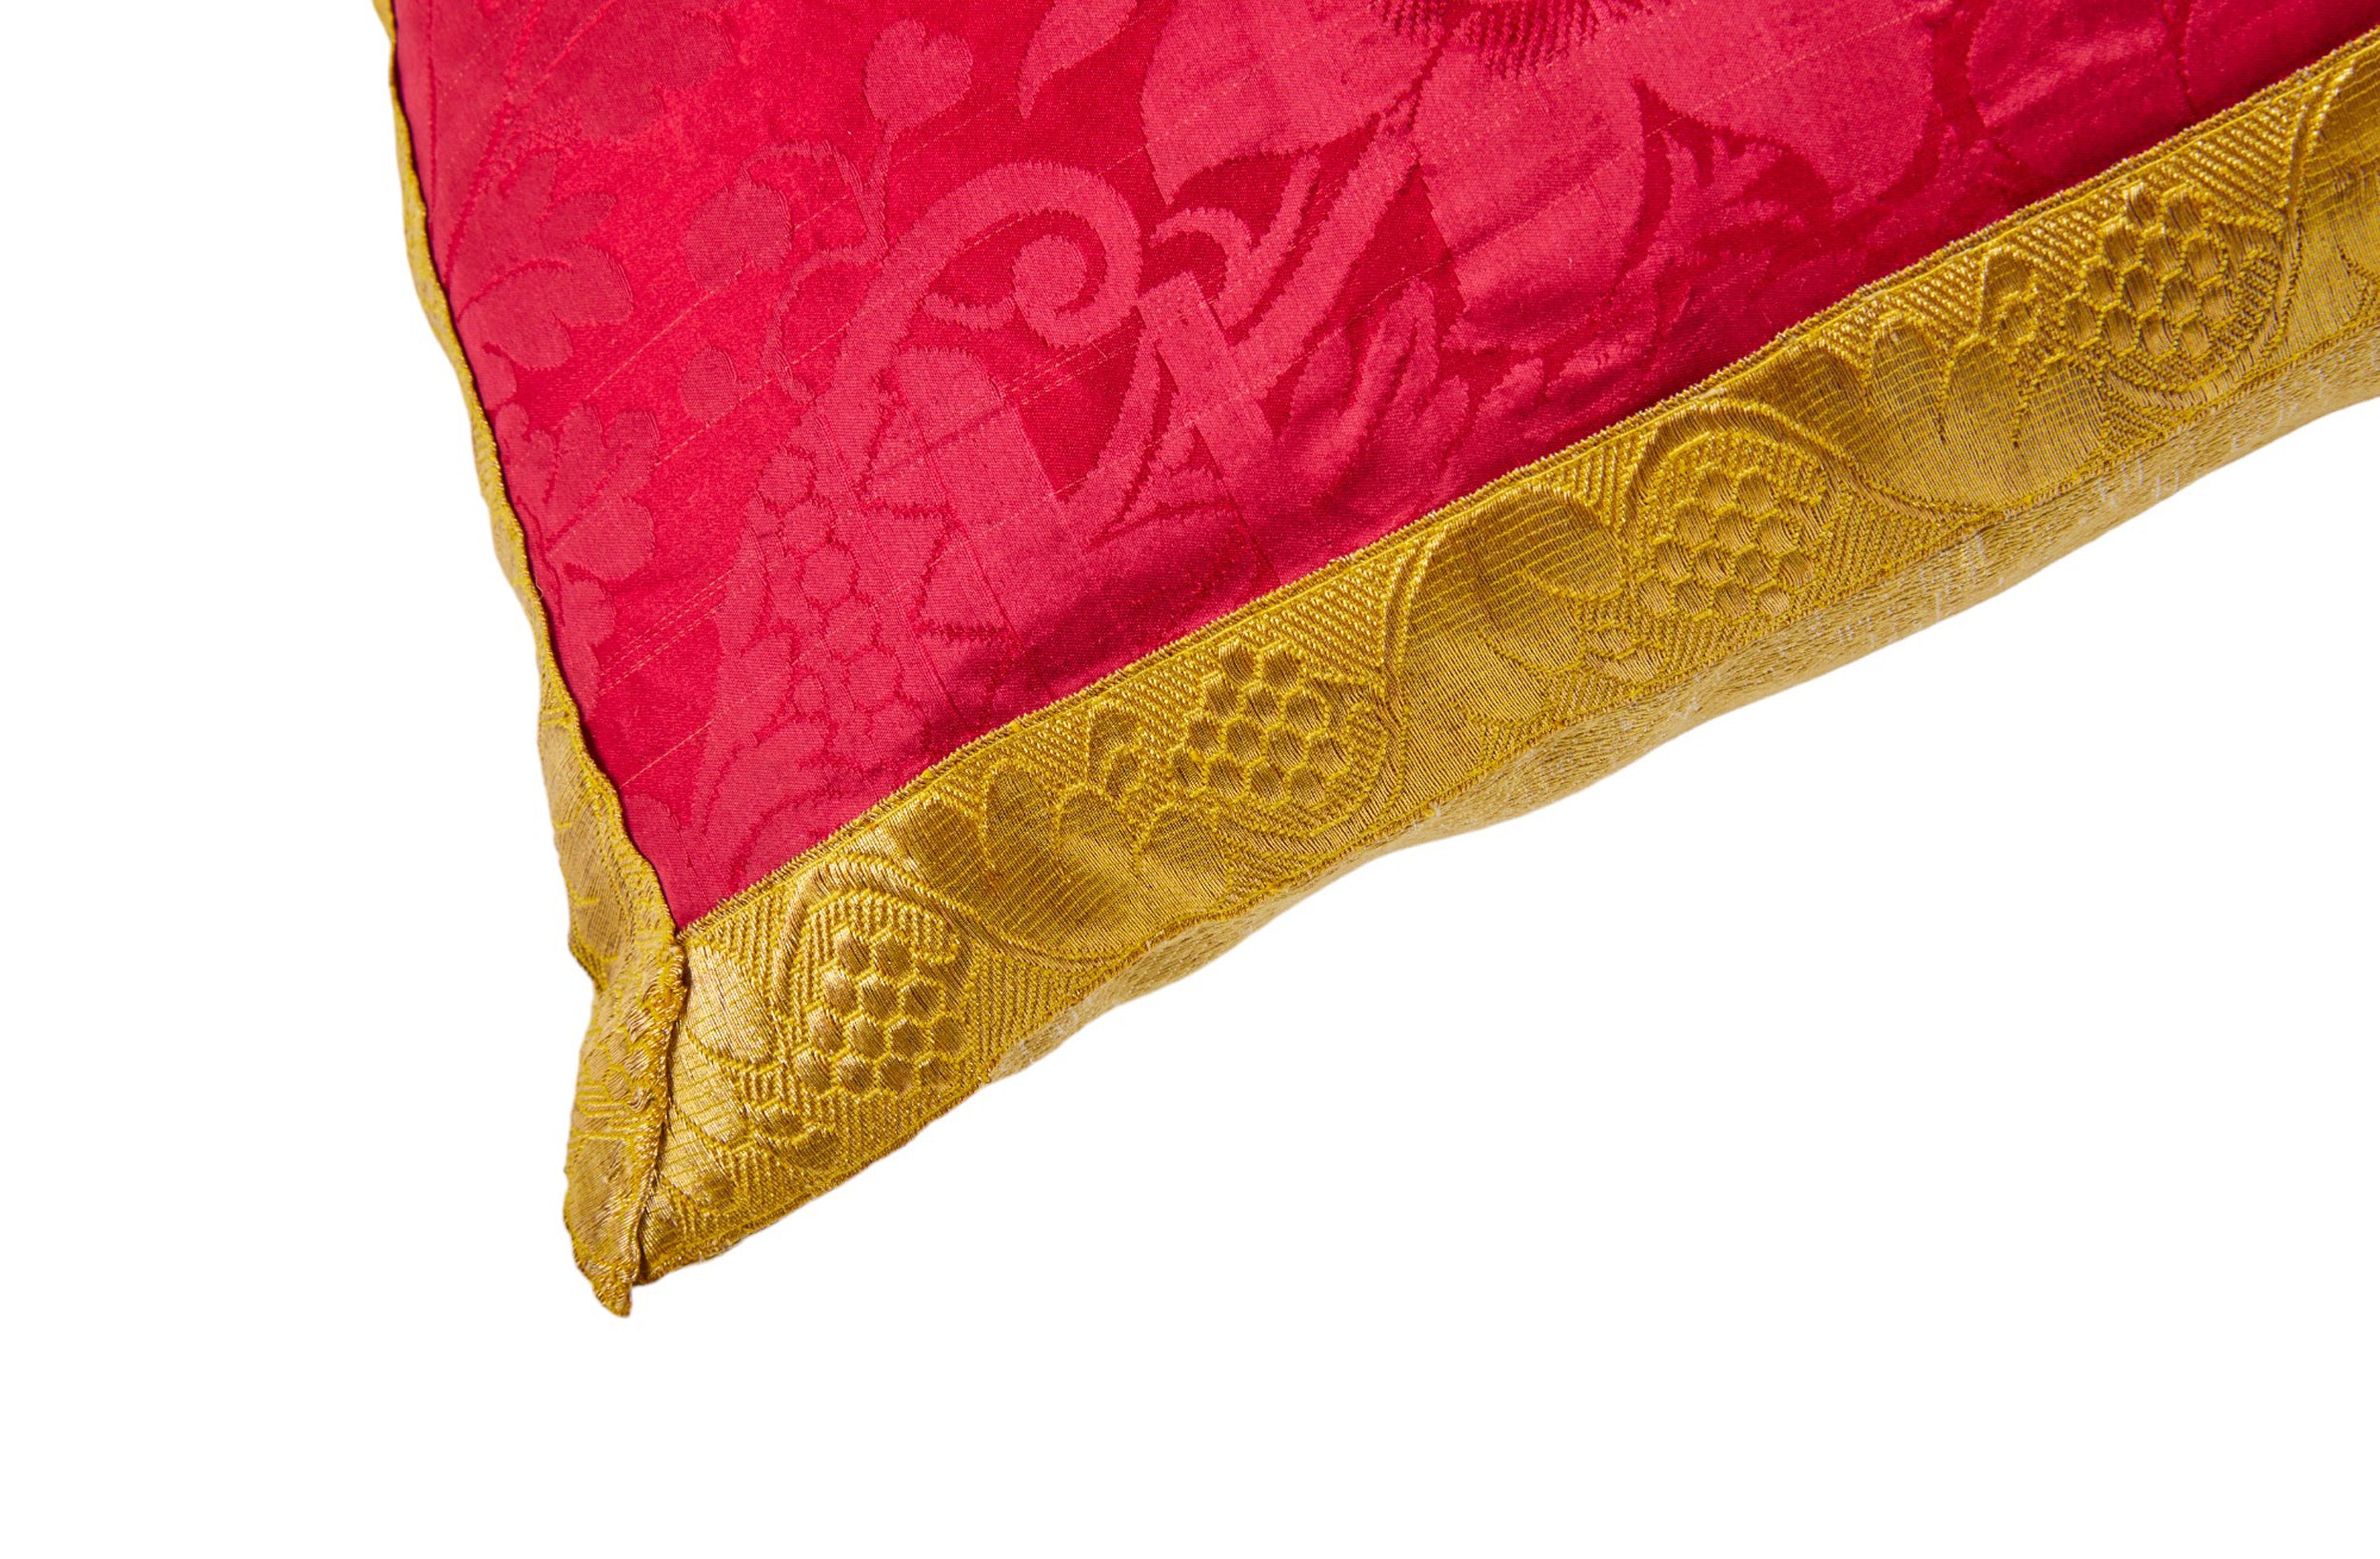 A Pair of Cushions made from an Early 19th Century Magenta Silk Damask with Antique Gold Braid